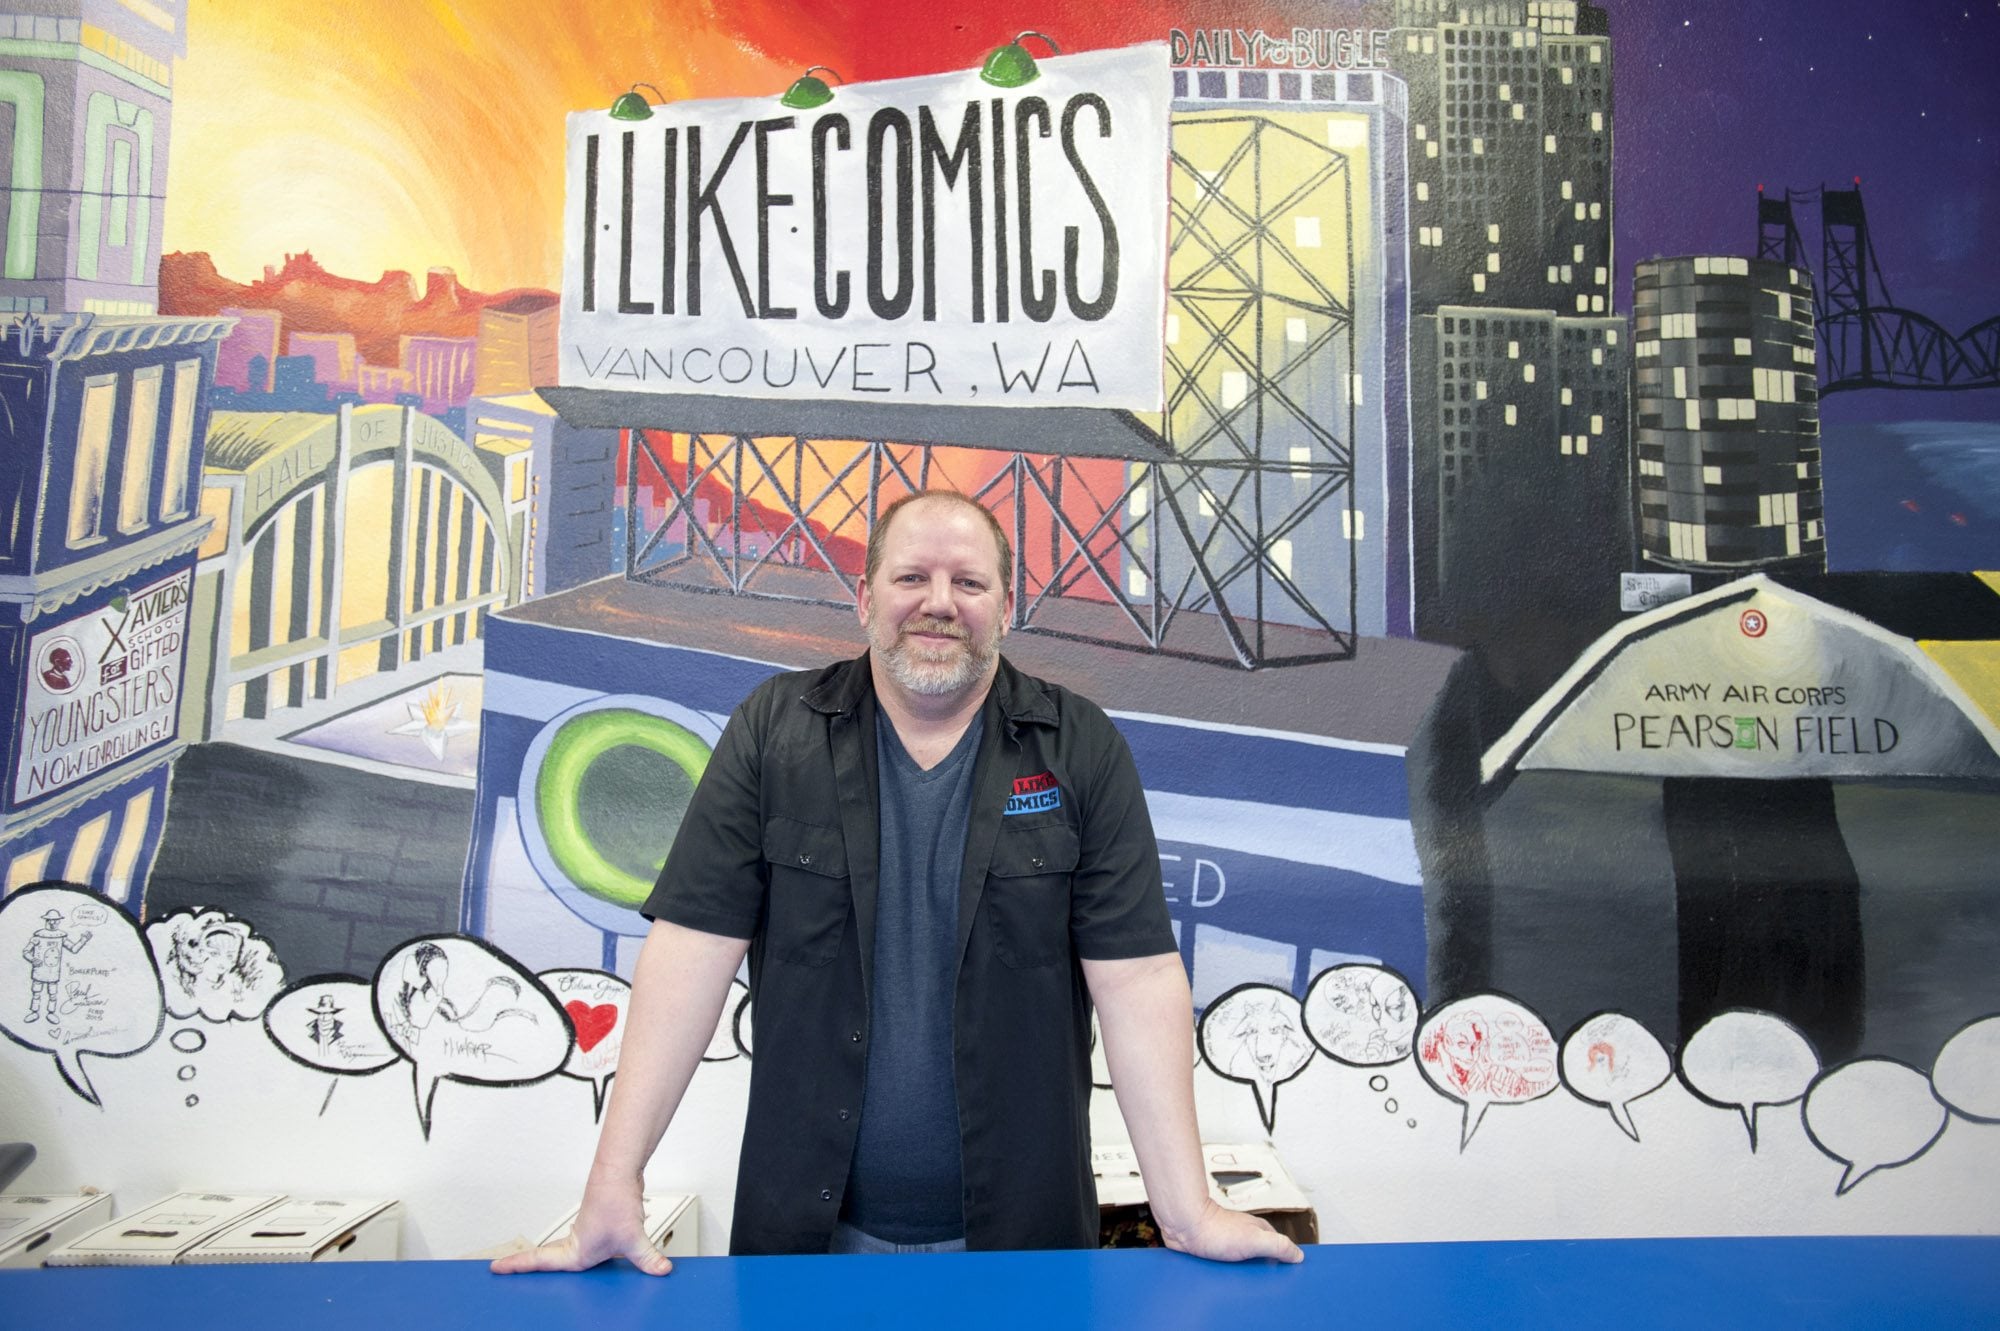 Chris Simons, owner of I like Comics, recently moved the store to larger quarters at 1715 Broadway in downtown Vancouver. The store&#039;s mural behind Simons was painted by some customers.